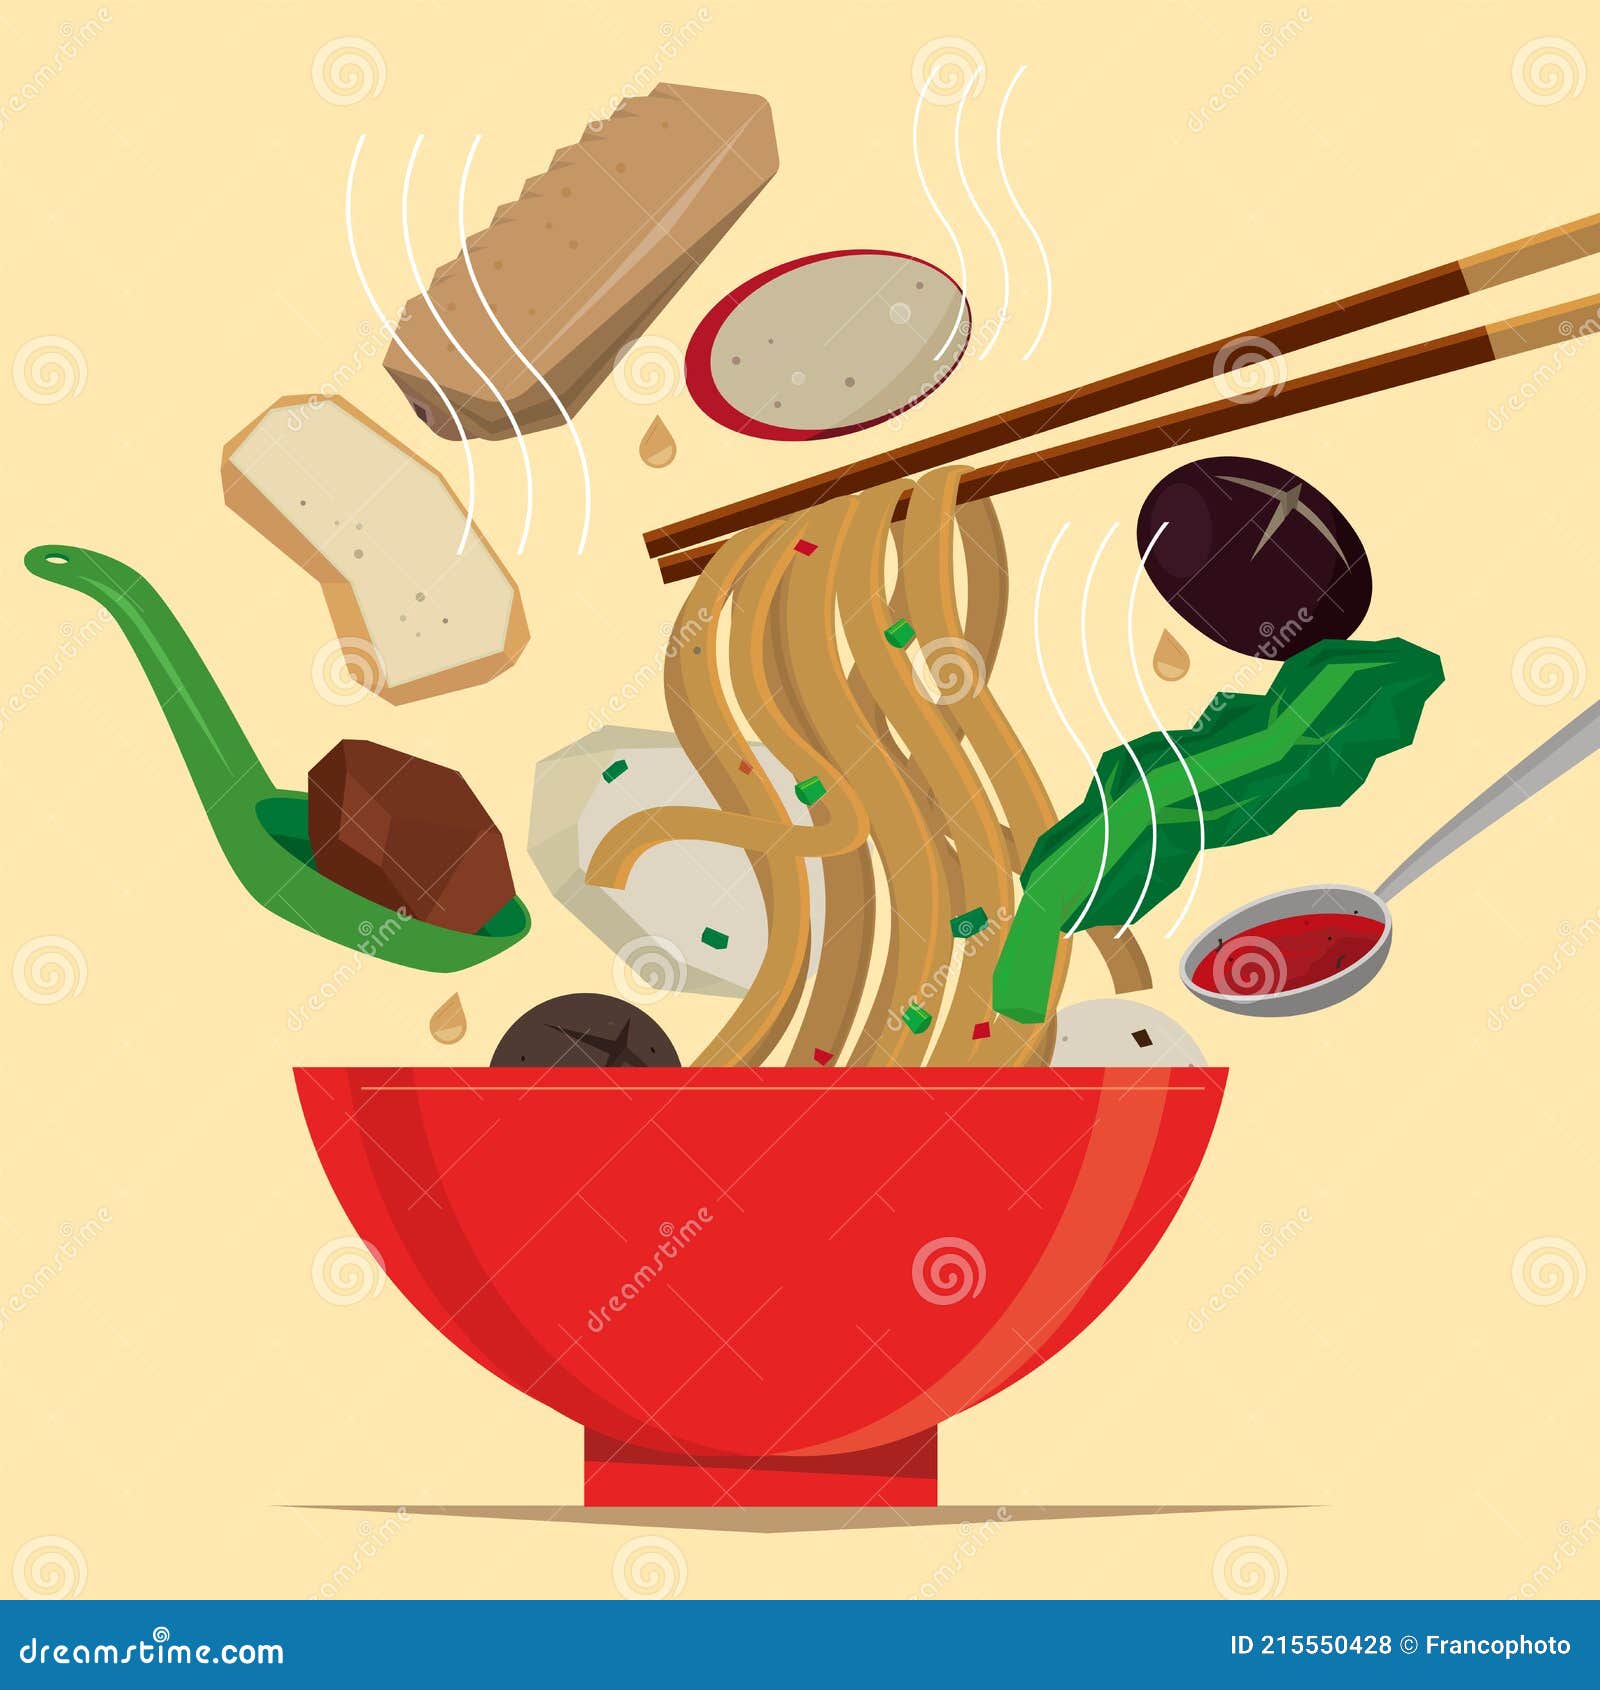 Graphic Illustration of a Meal of Hong Kong-styled Cart Noodles Stock  Vector - Illustration of noodle, toppings: 215550428